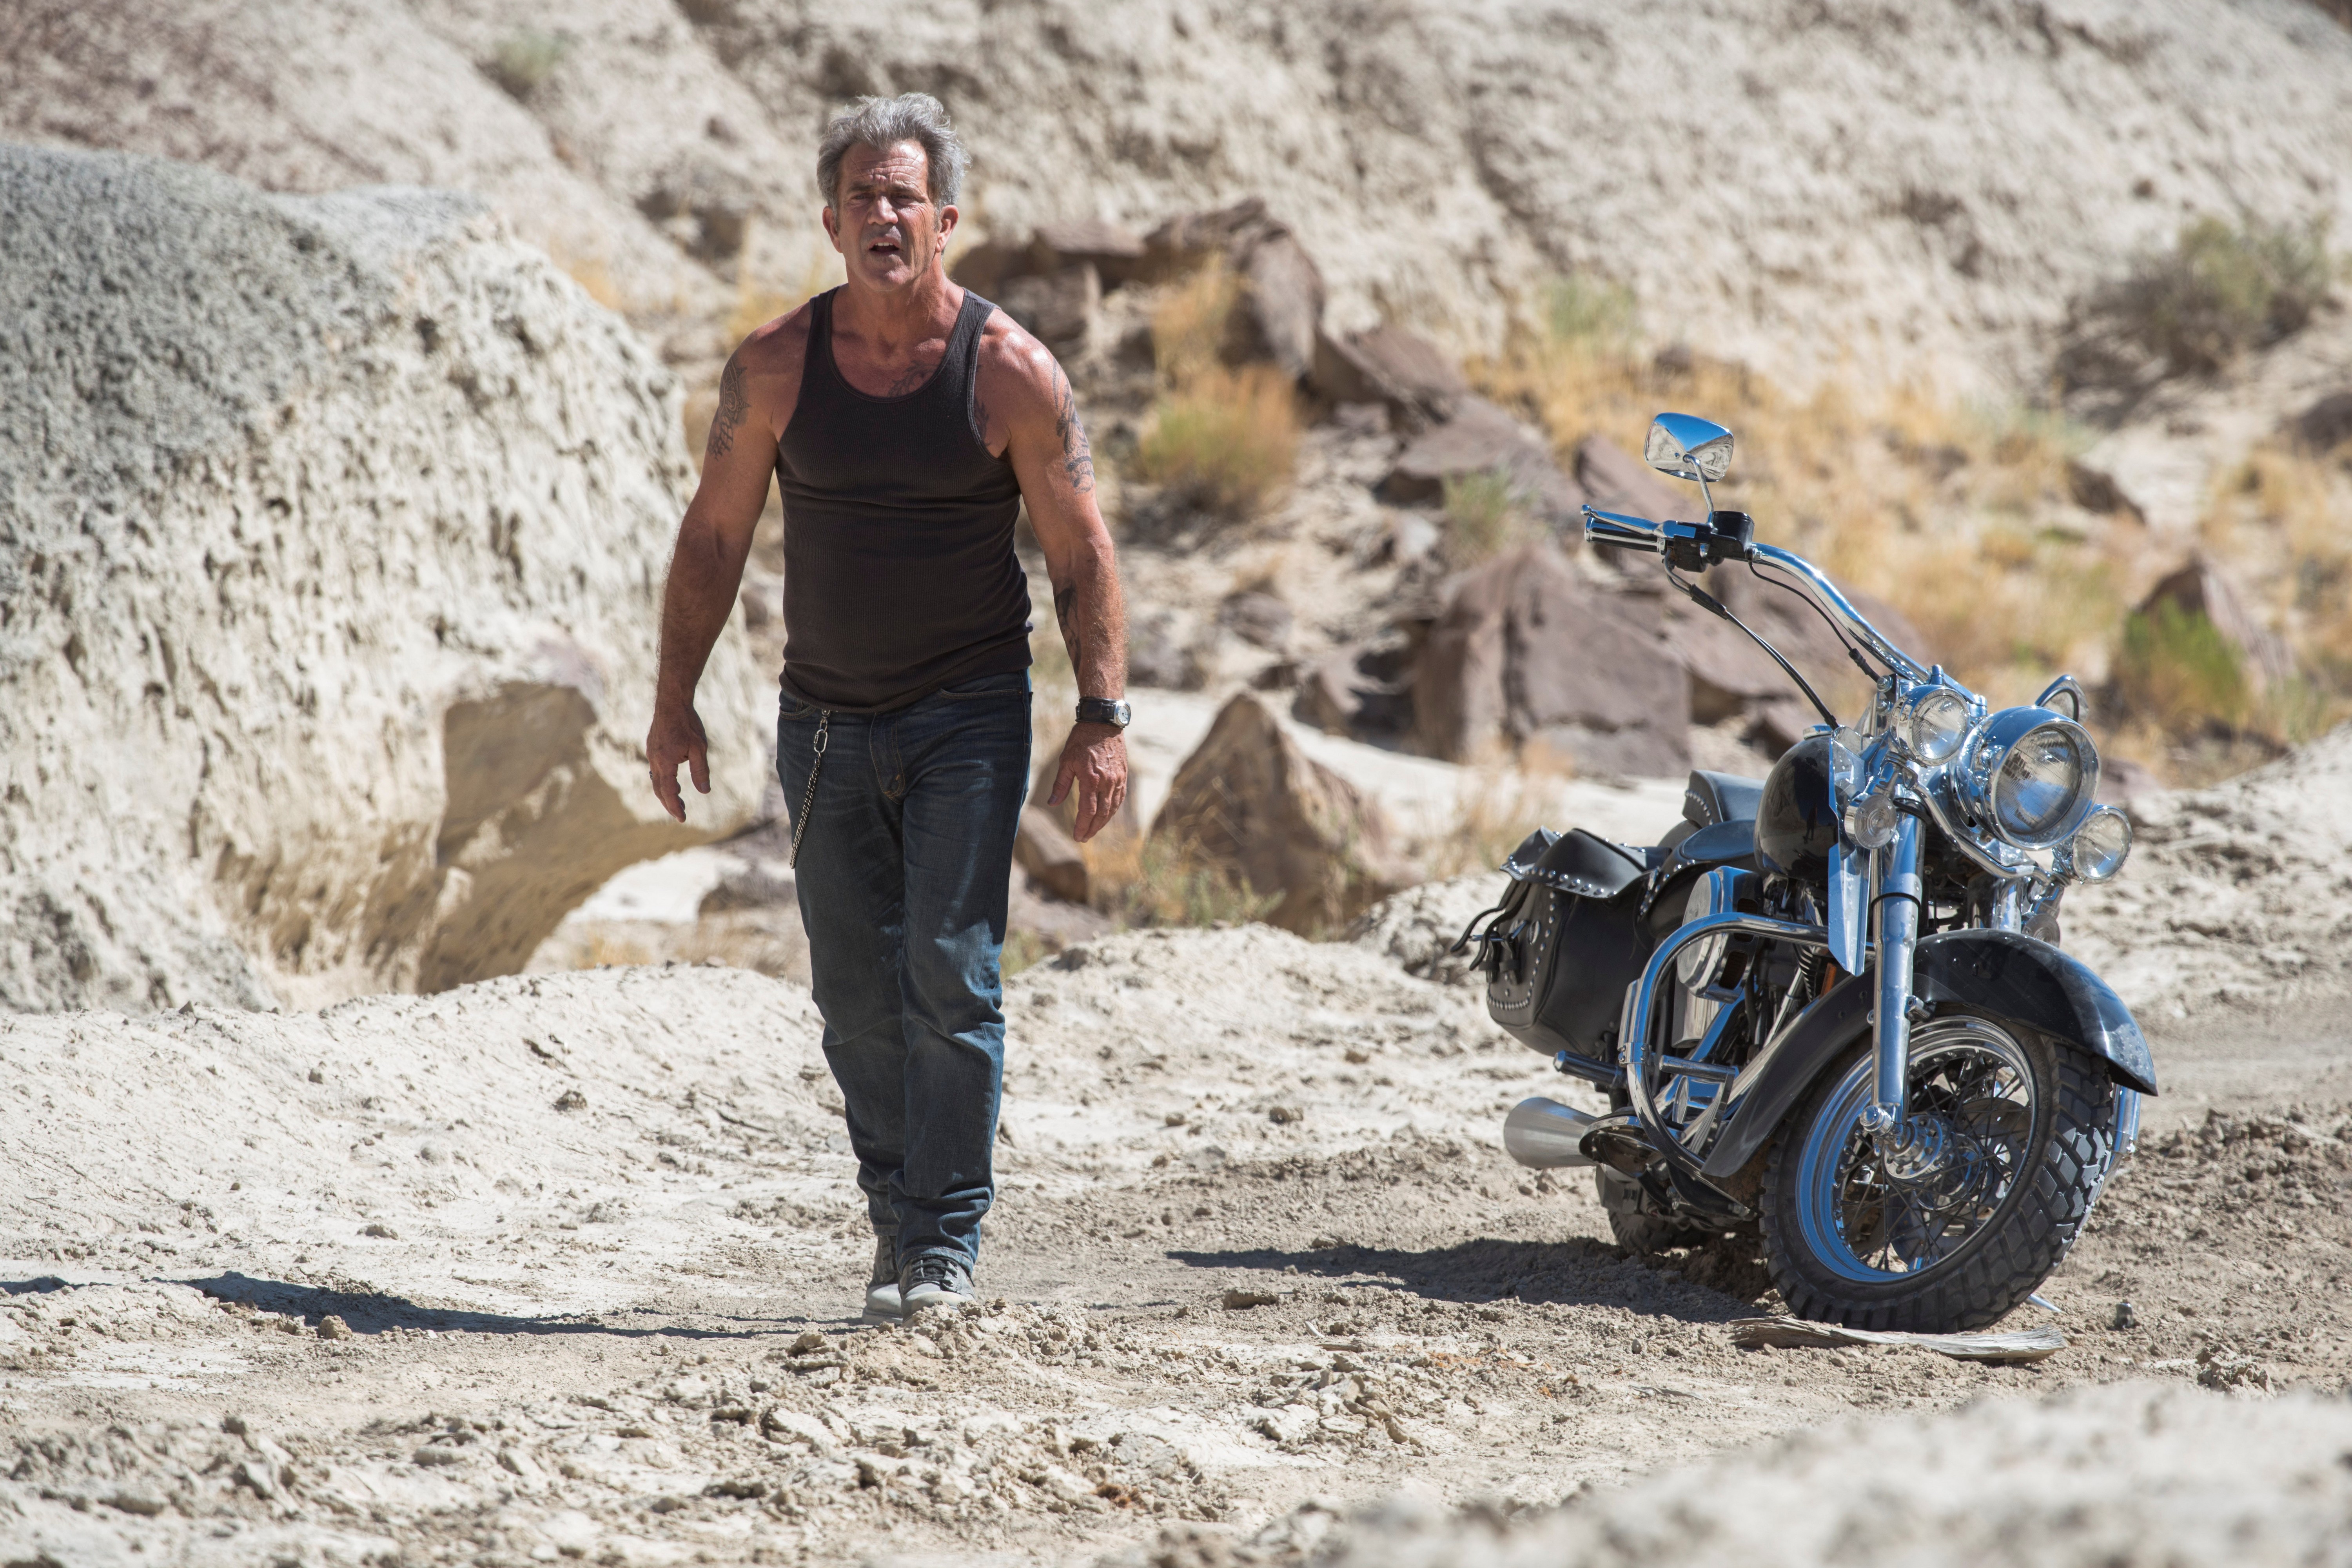 Movie Blood Father HD Wallpaper | Background Image